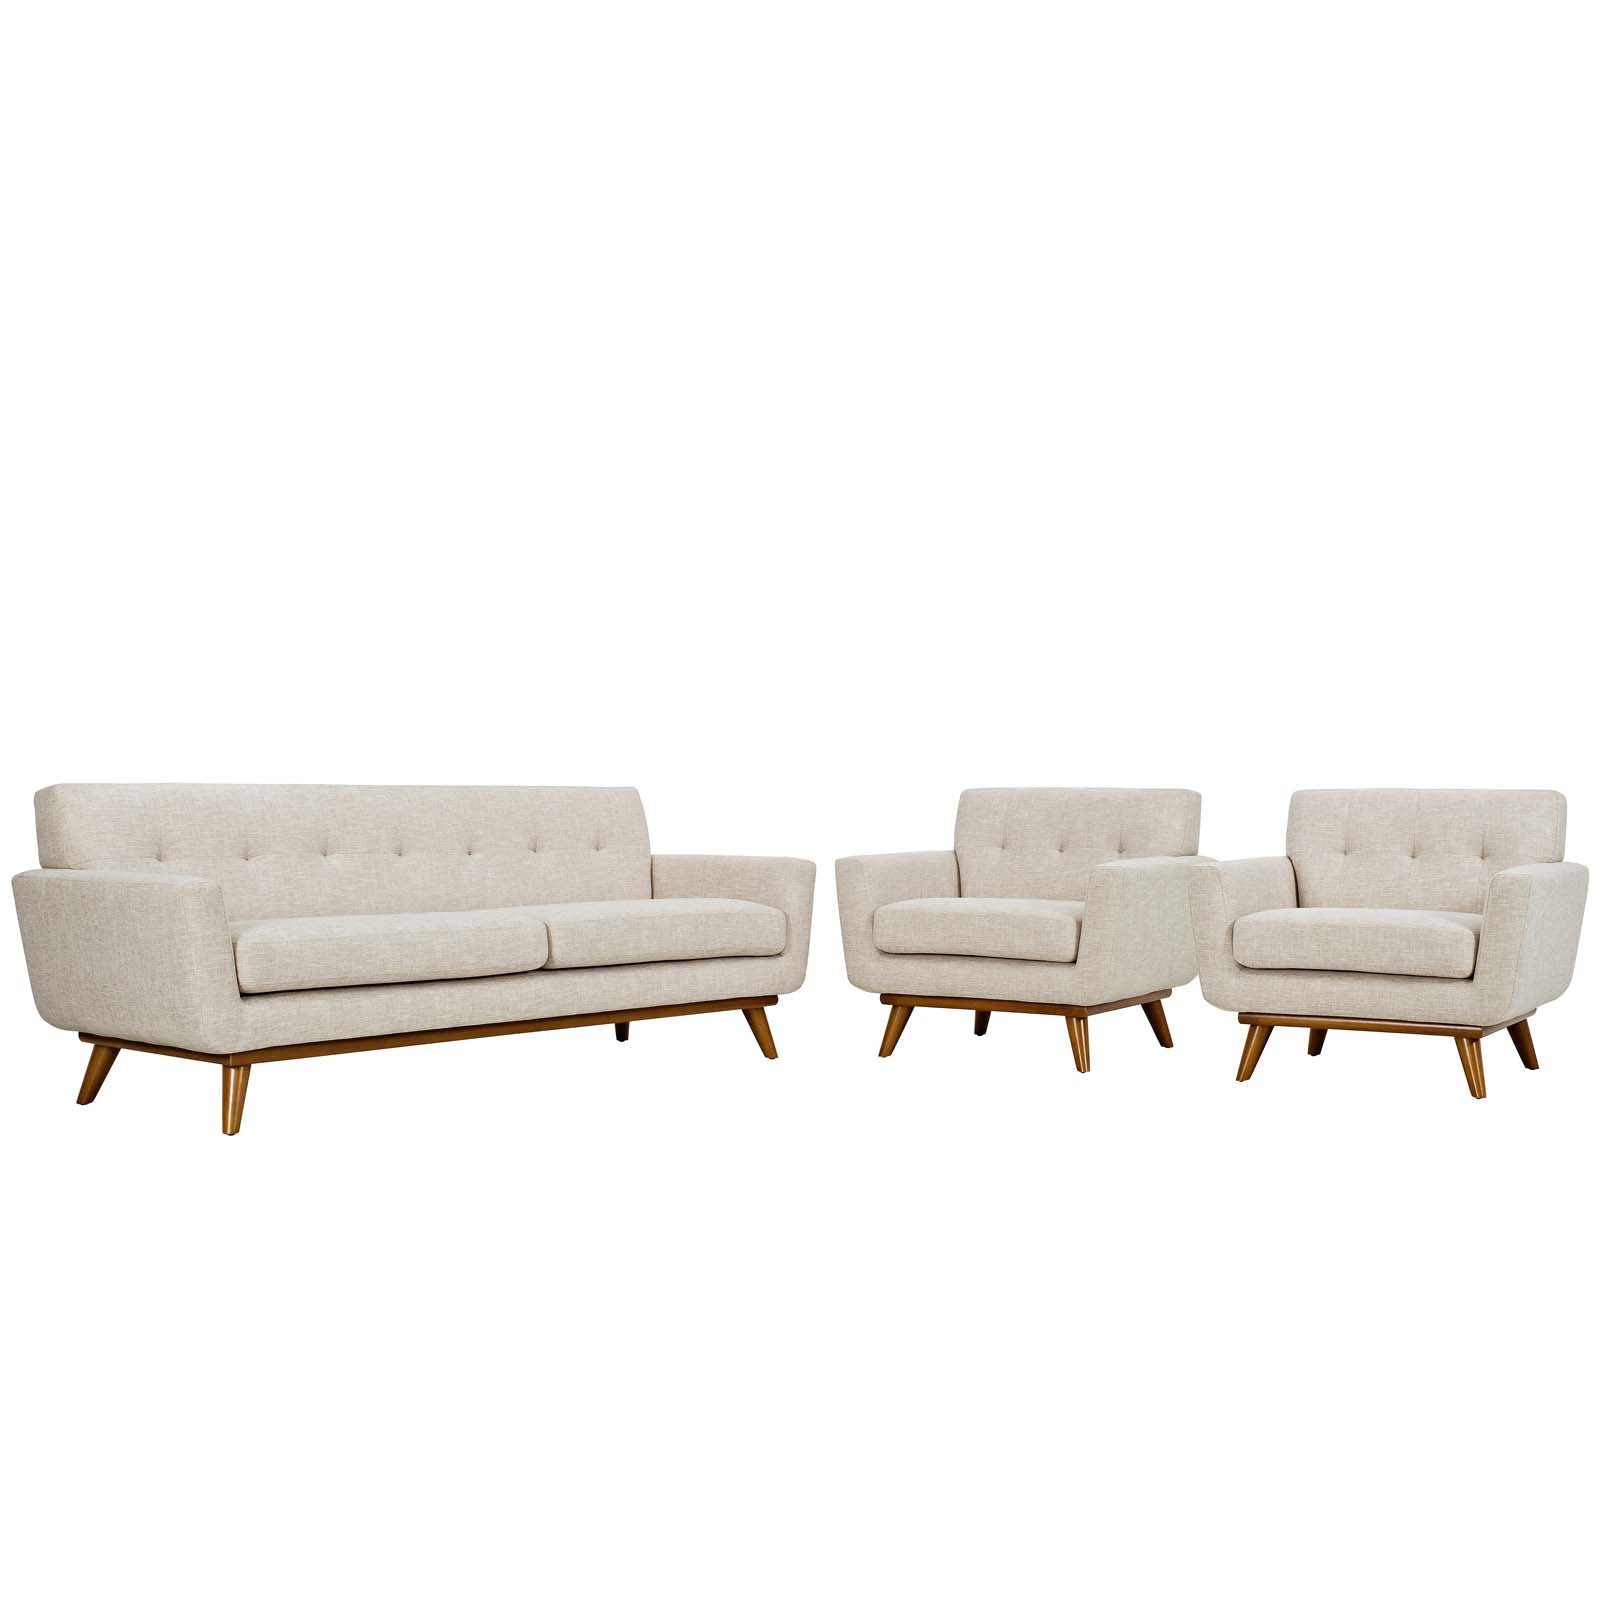 Modway Living Room Sets - Engage Armchairs and Sofa Beige ( Set of 3 )